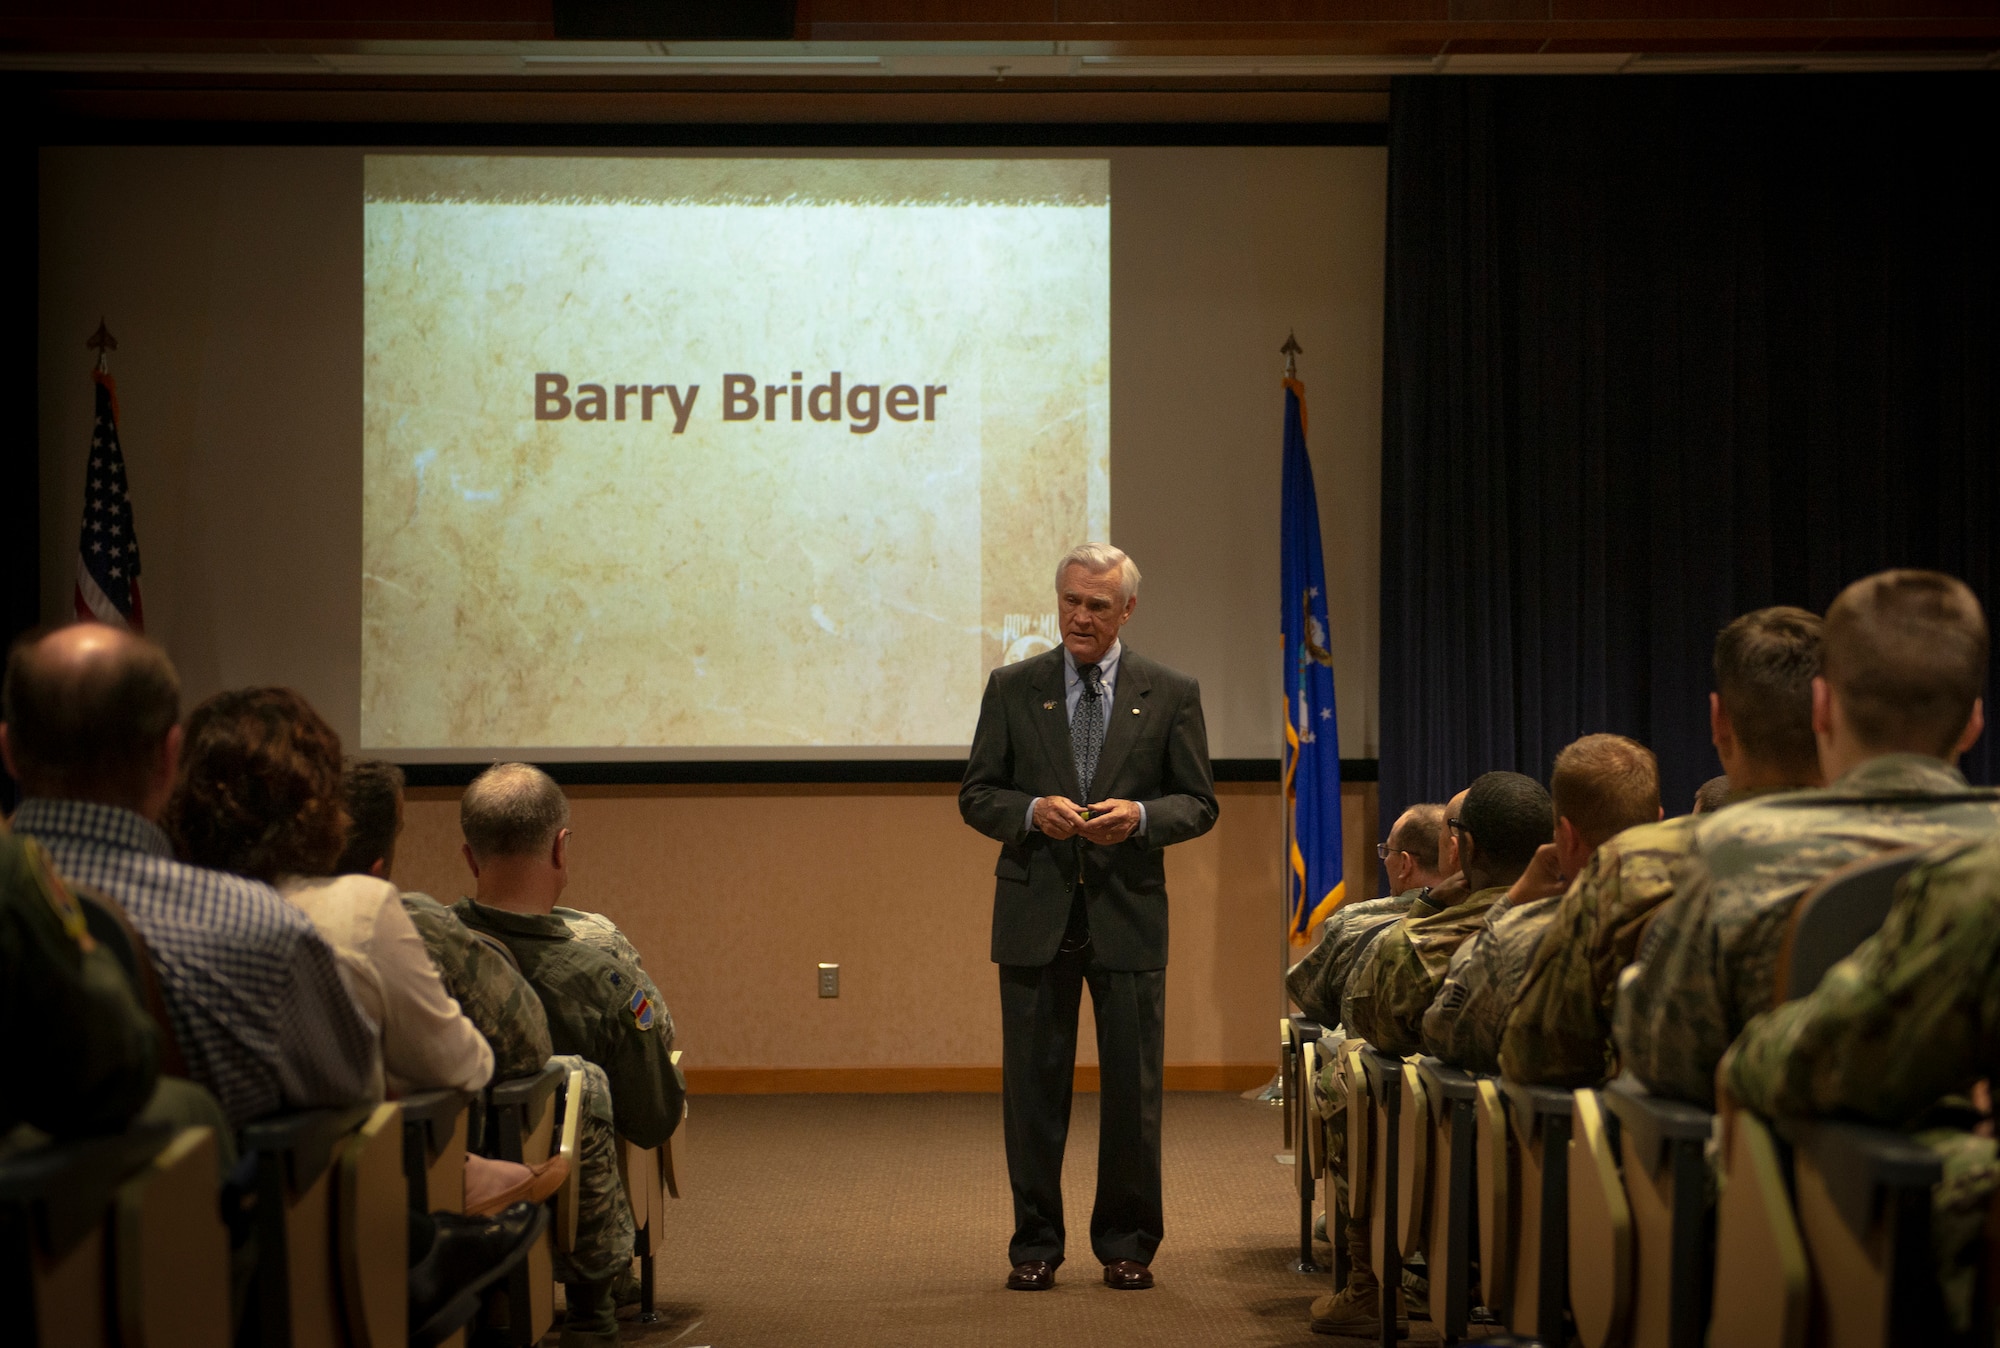 Vietnam veteran and Prisoner of War, retired Air Force Lt. Col. Barry Bridger spoke at commander’s update briefing May 16, 2019, at Offutt Air Force Base, Nebraska. Bridger was shot down Jan.23 1967, only to be captured and imprisoned at Hoa Loa Prision. He was presumed missing in action until 1970, when Vietnamese government finally acknowledged that he was a prisoner of war.